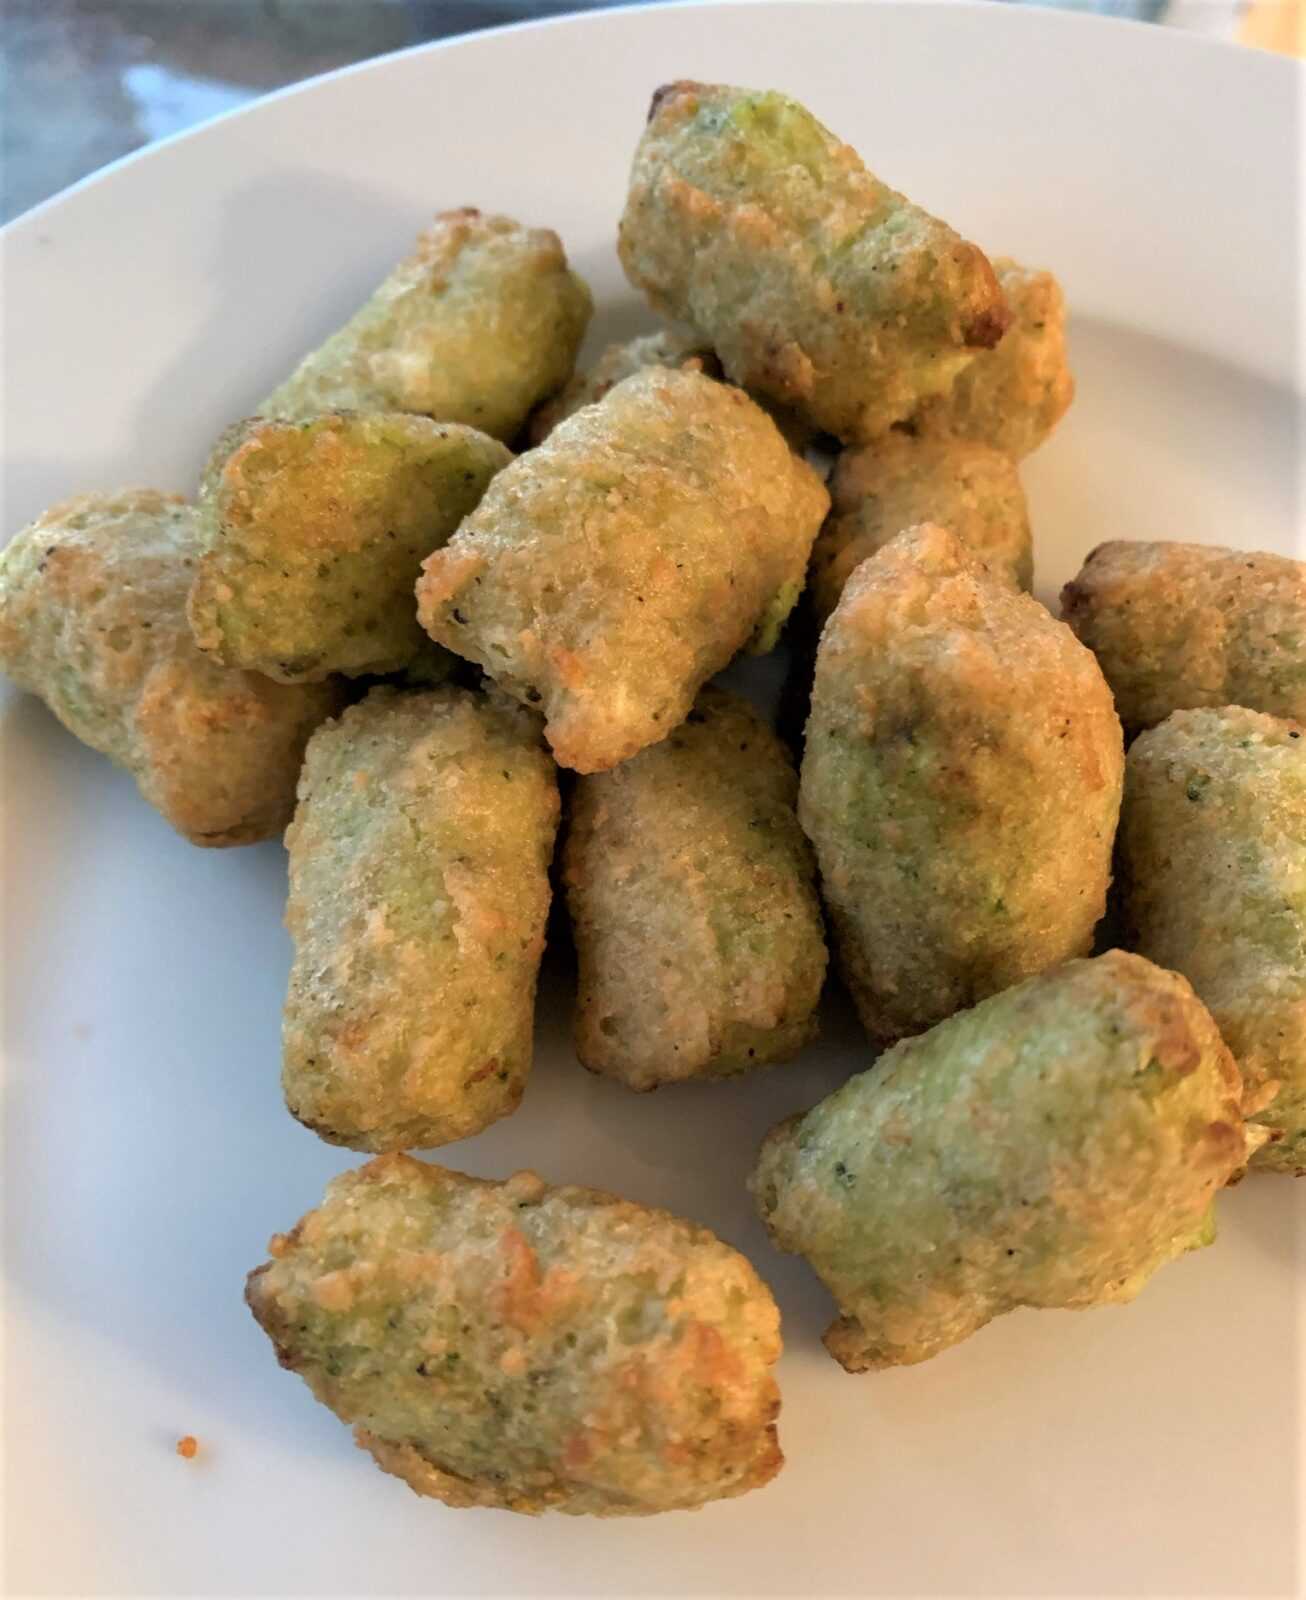 veggie tots on a plate